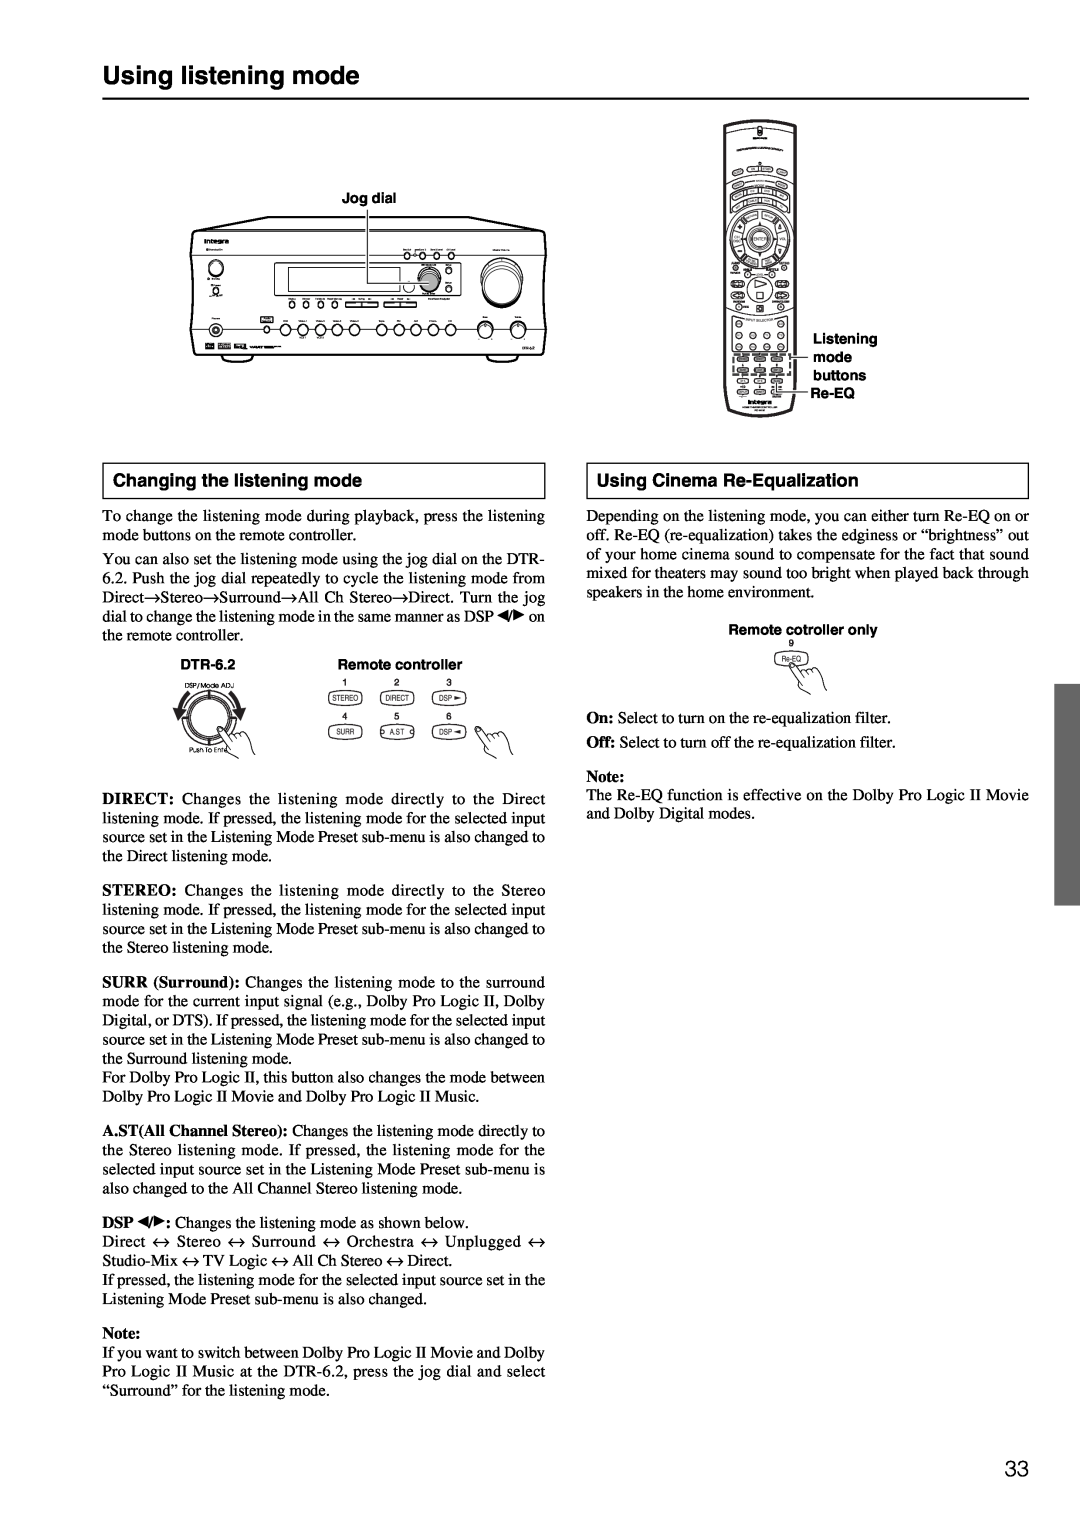 Integra DTR-6.2 instruction manual Using listening mode, Changing the listening mode, Using Cinema Re-Equalization 